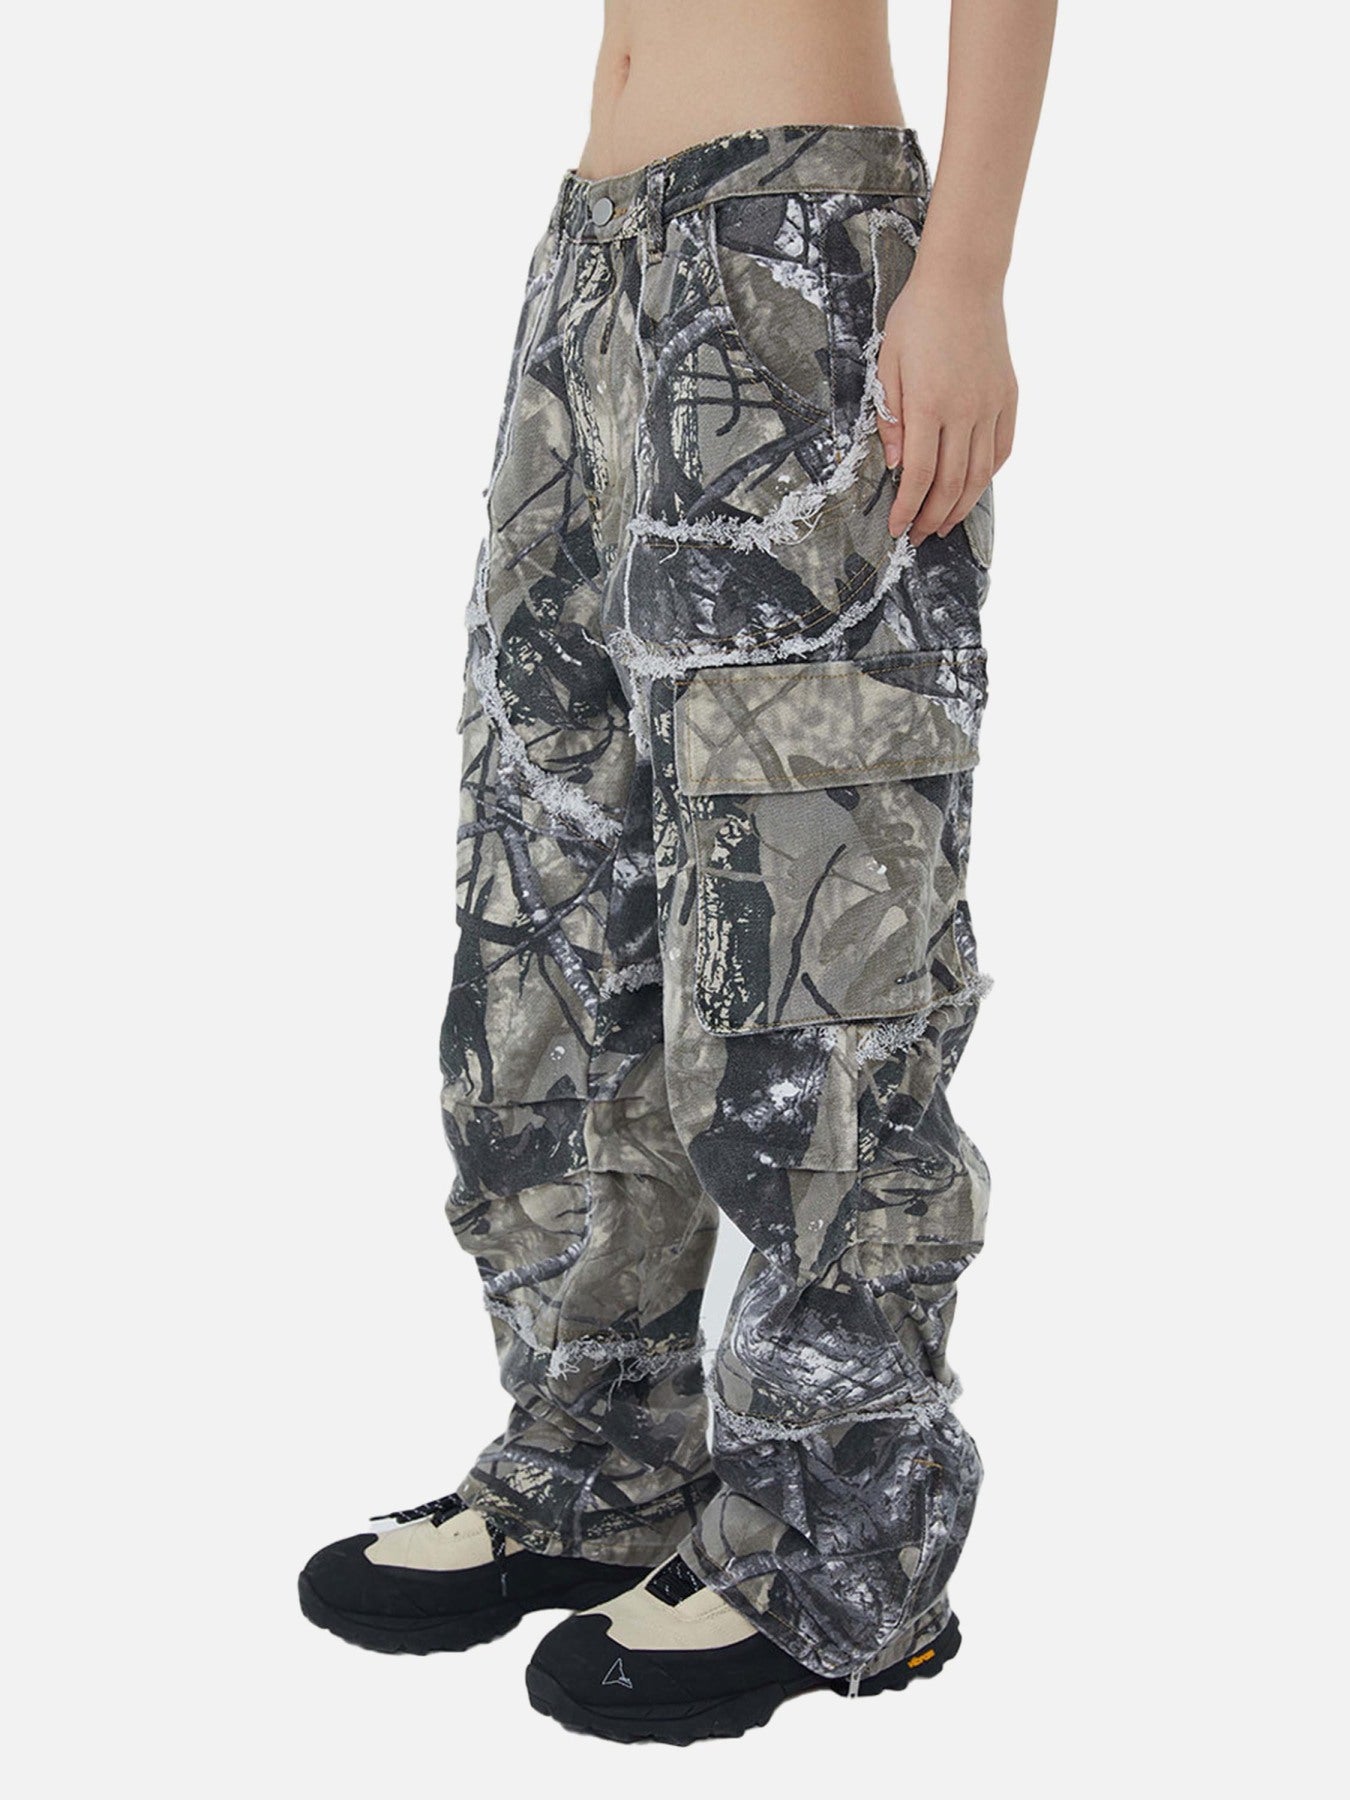 The Supermade Jungle Camouflage Leaf Loose Fit Straight Leg Pants